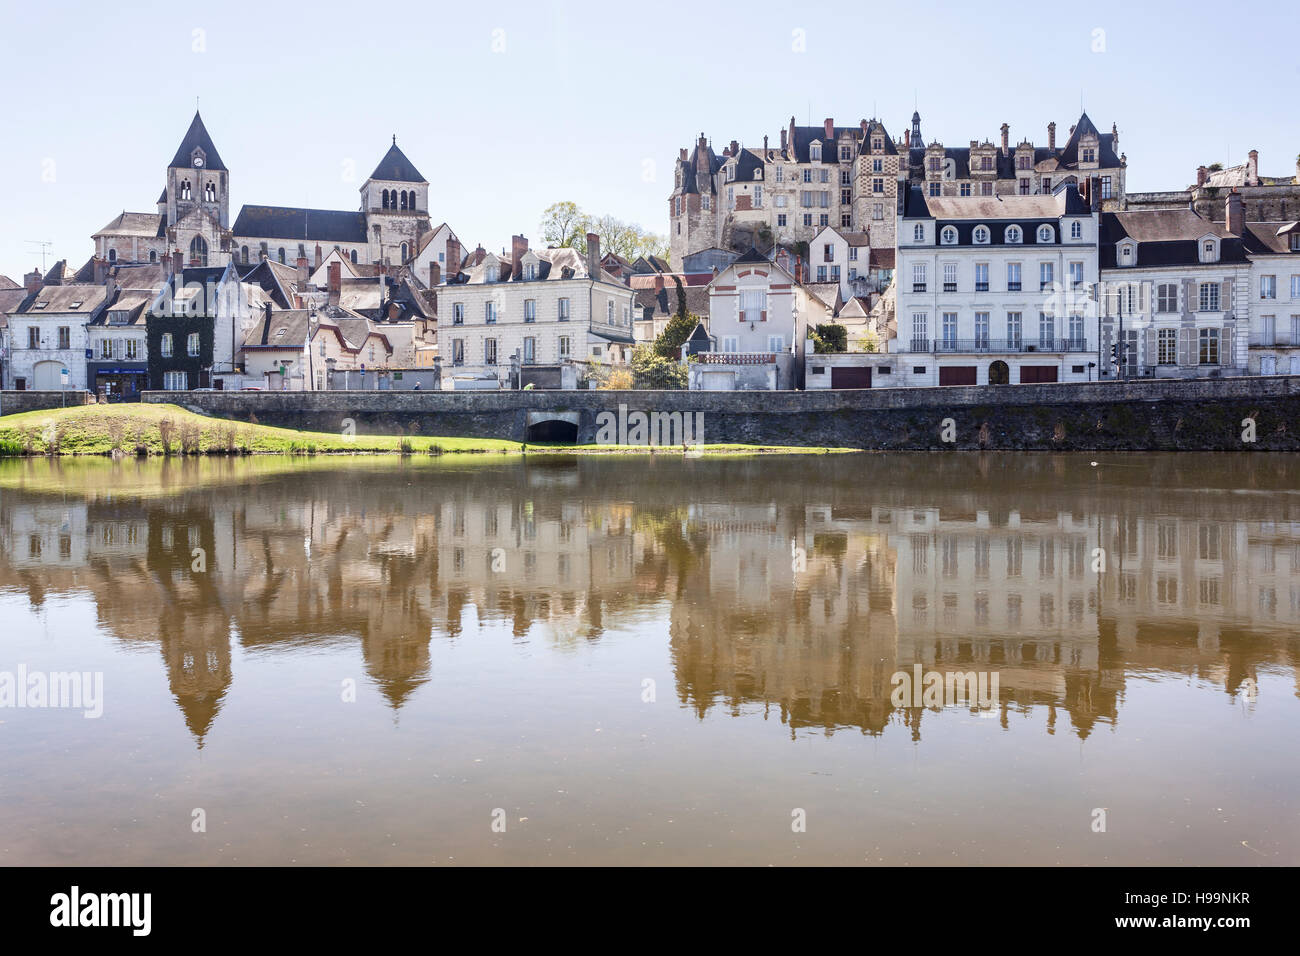 The small town of Saint Aignan reflecting in the river Cher on a hot spring day. The chateau can be seen looming over the town below. Stock Photo